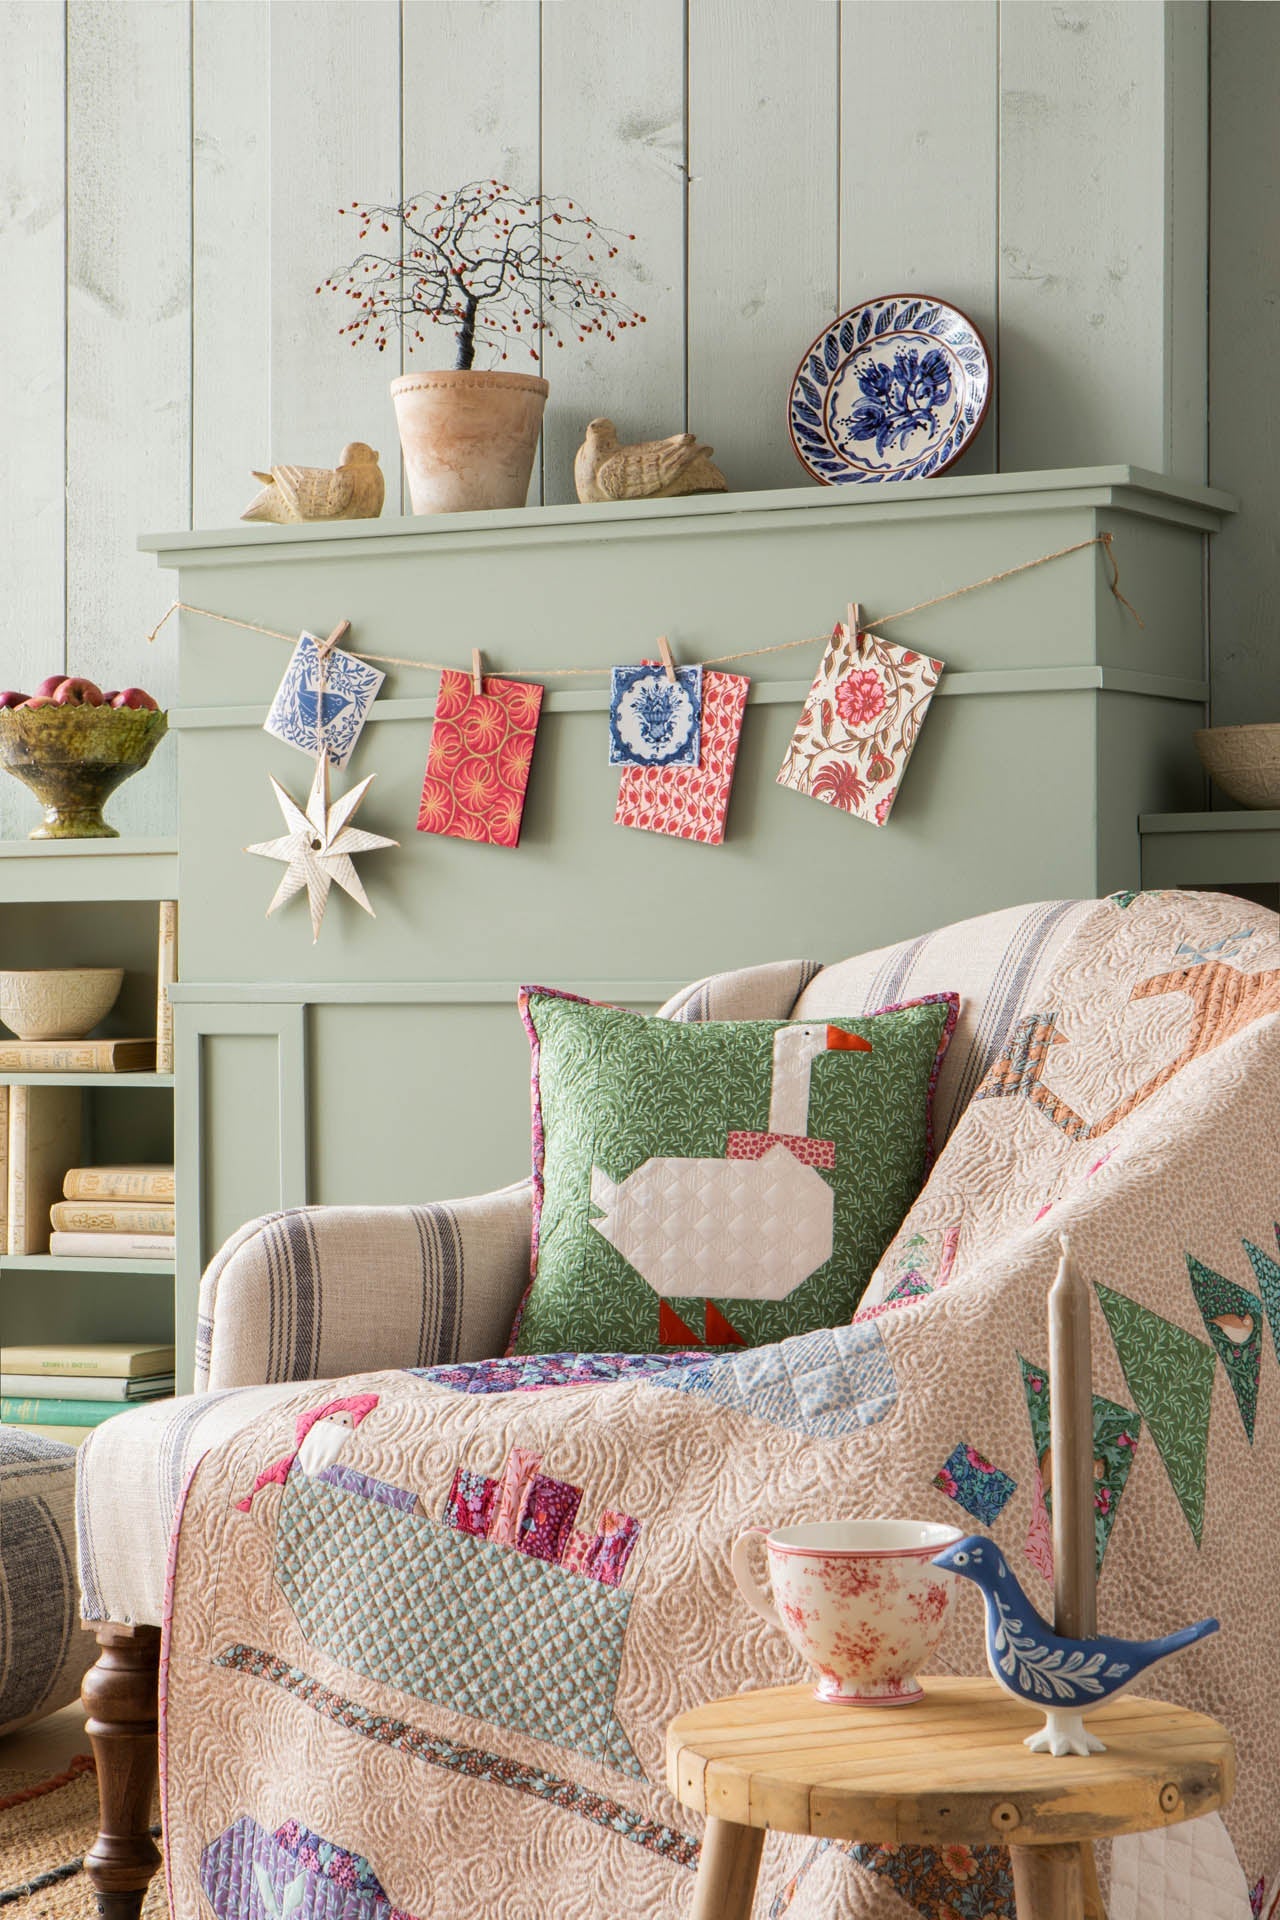 POTTERY BARN KIDS UNVEILS BRIGHT BOHEMIAN COLLECTION WITH DESIGNER